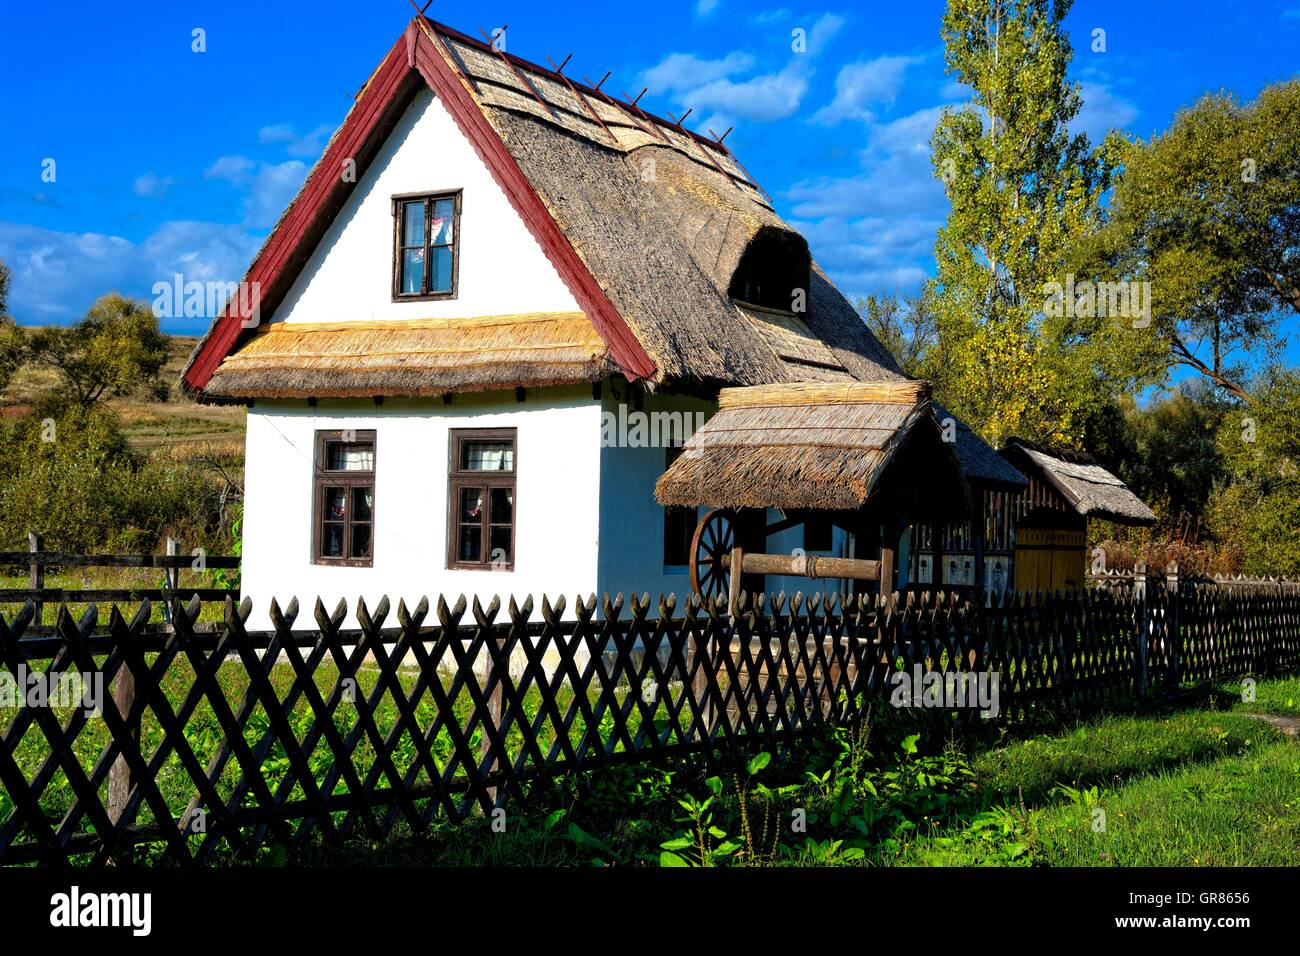 Reet, Thatched Roof Farmhouse Stock Photo